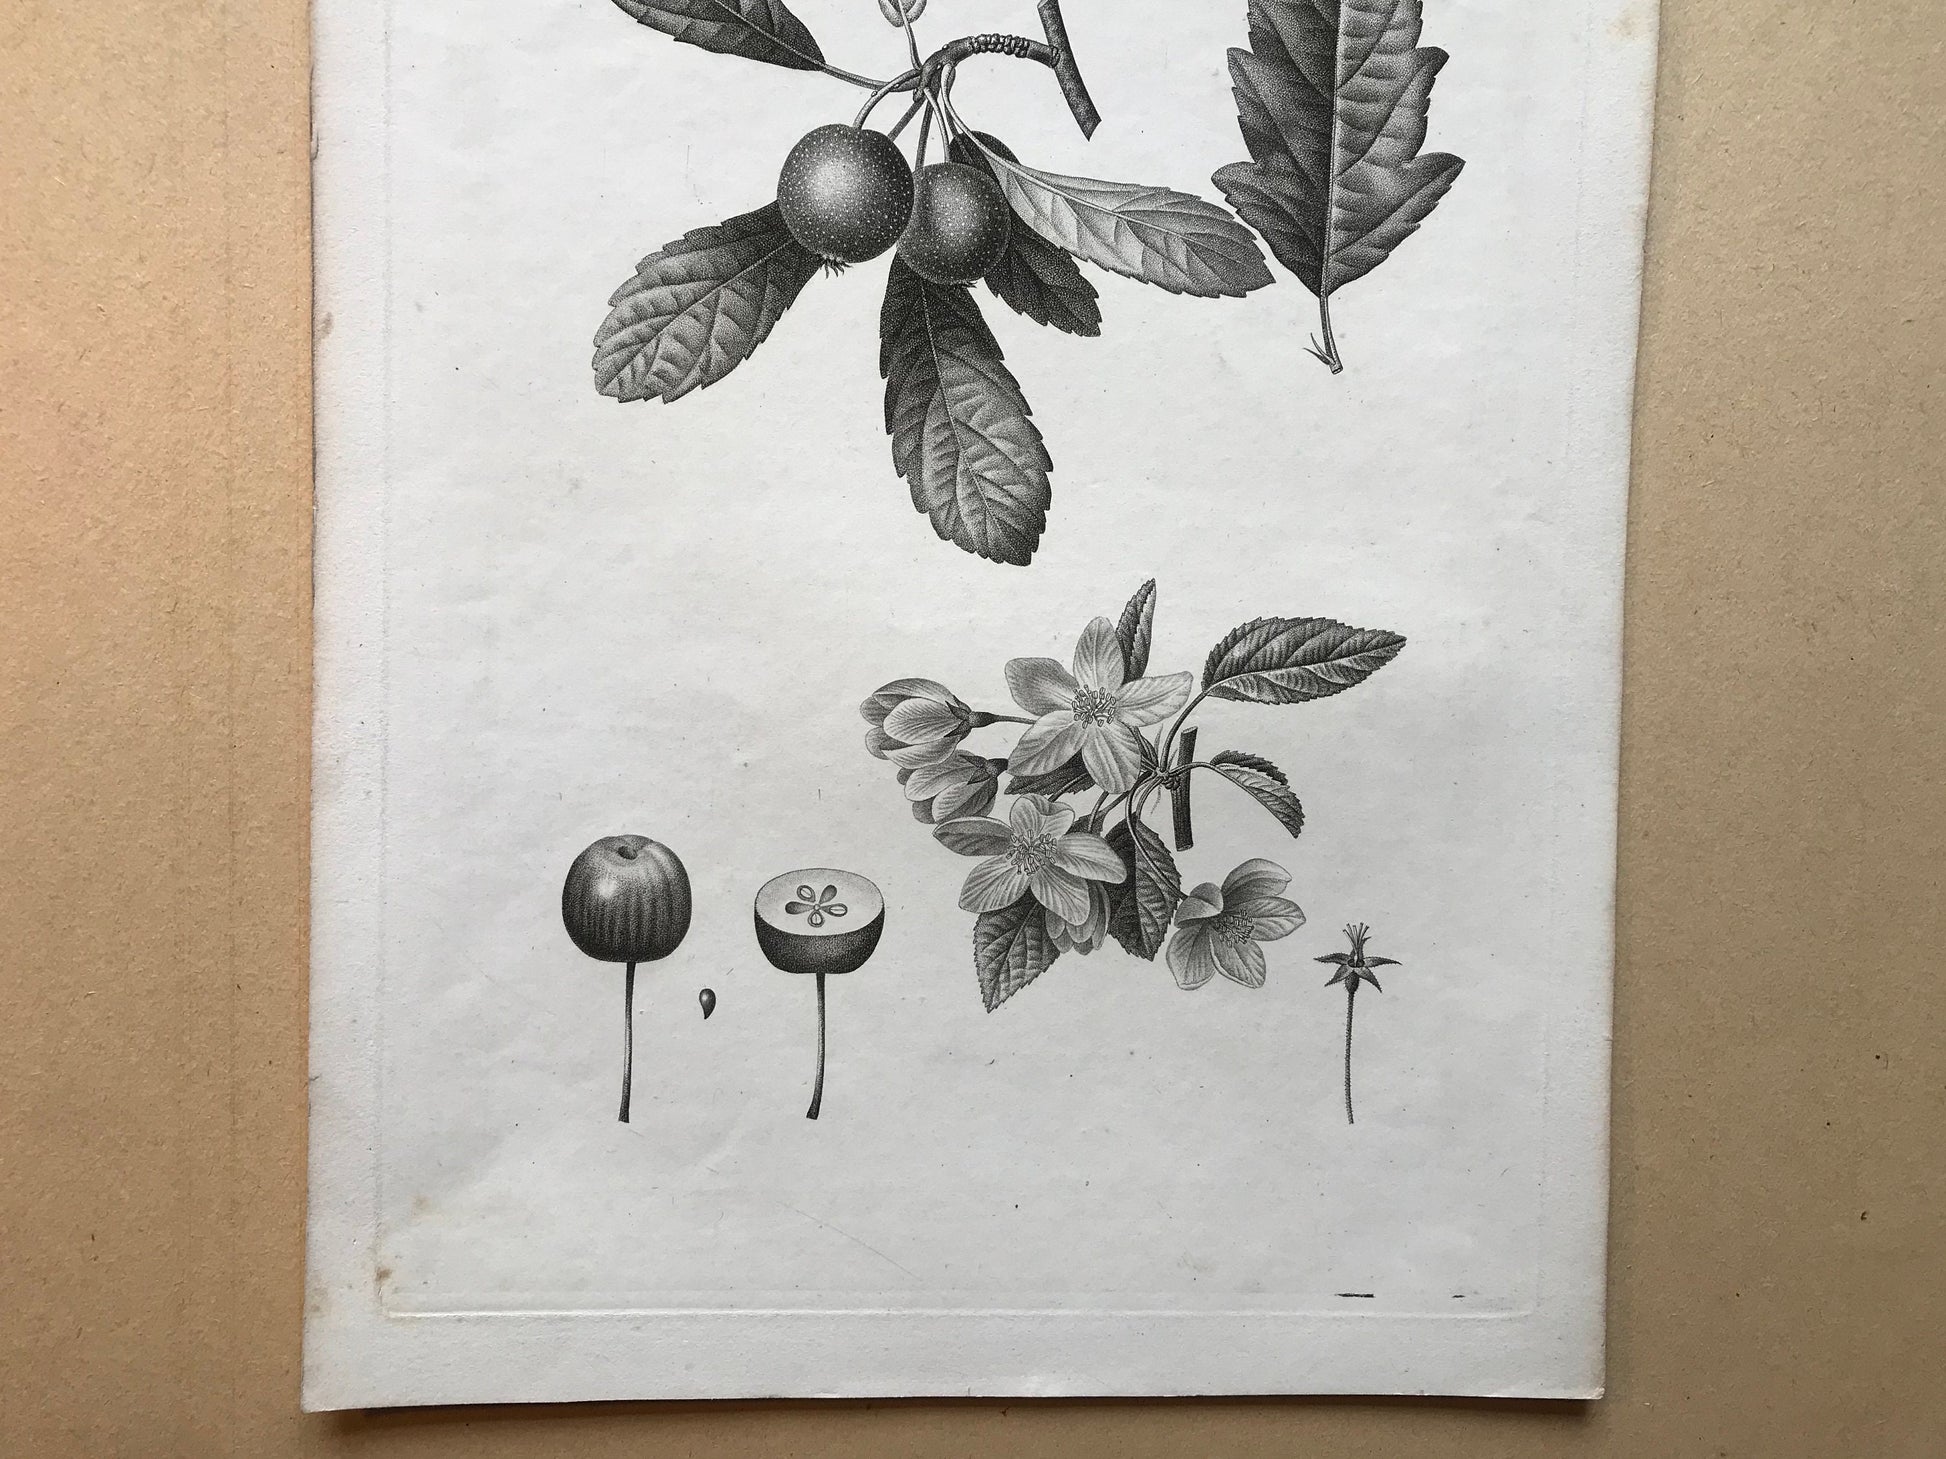 An Original 18th Century Engraving of a Fruiting Branch. With Detail of Fruit and Flower. French. By Debeuil. 13 1/4 x 10 inches.